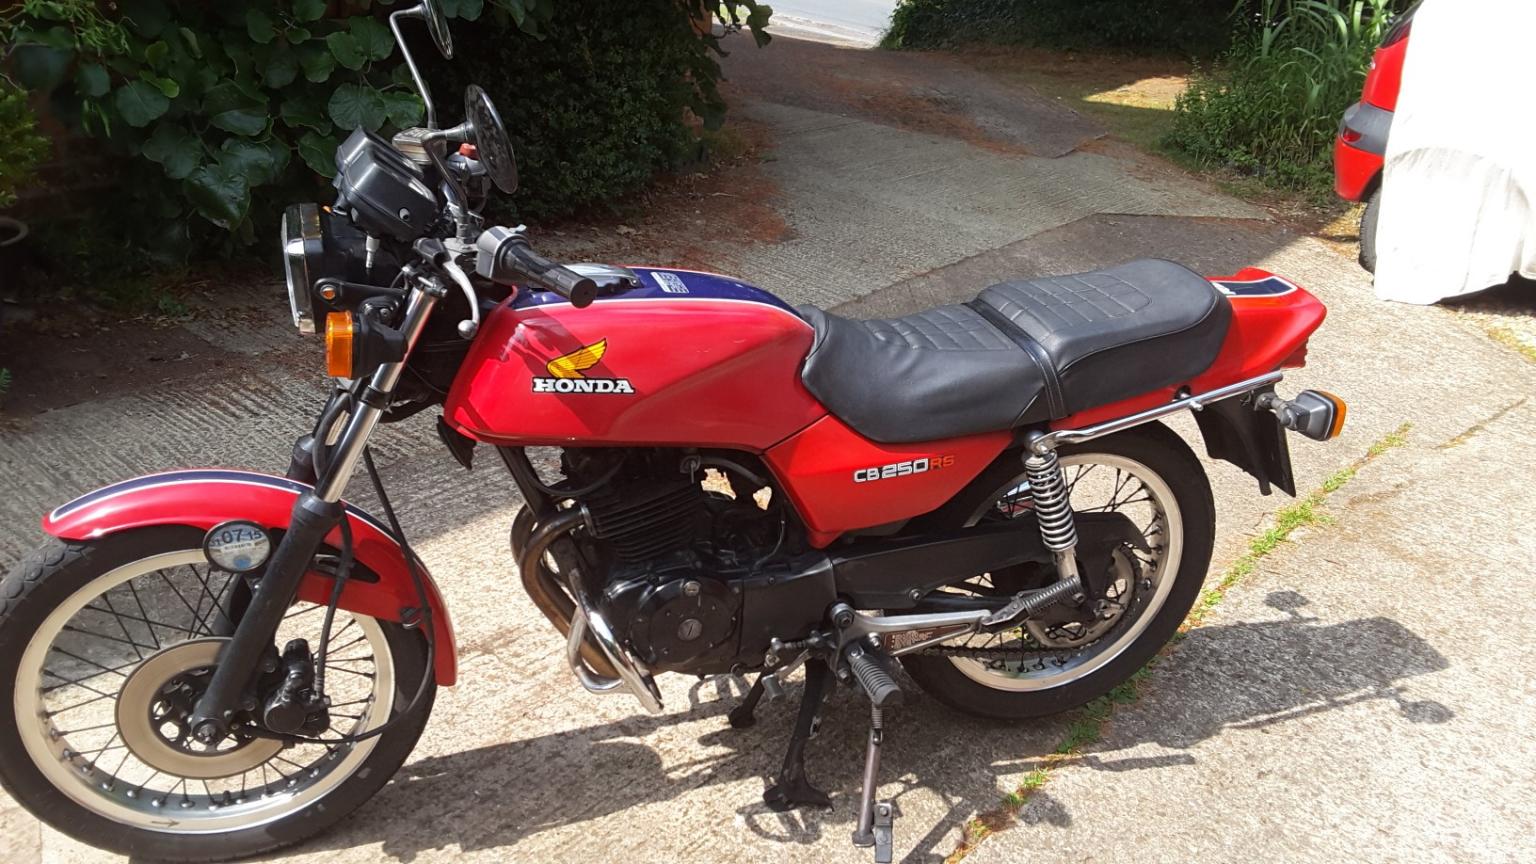 honda cb 250 rs 1981 in WR10 Wychavon for £1,000.00 for sale | Shpock